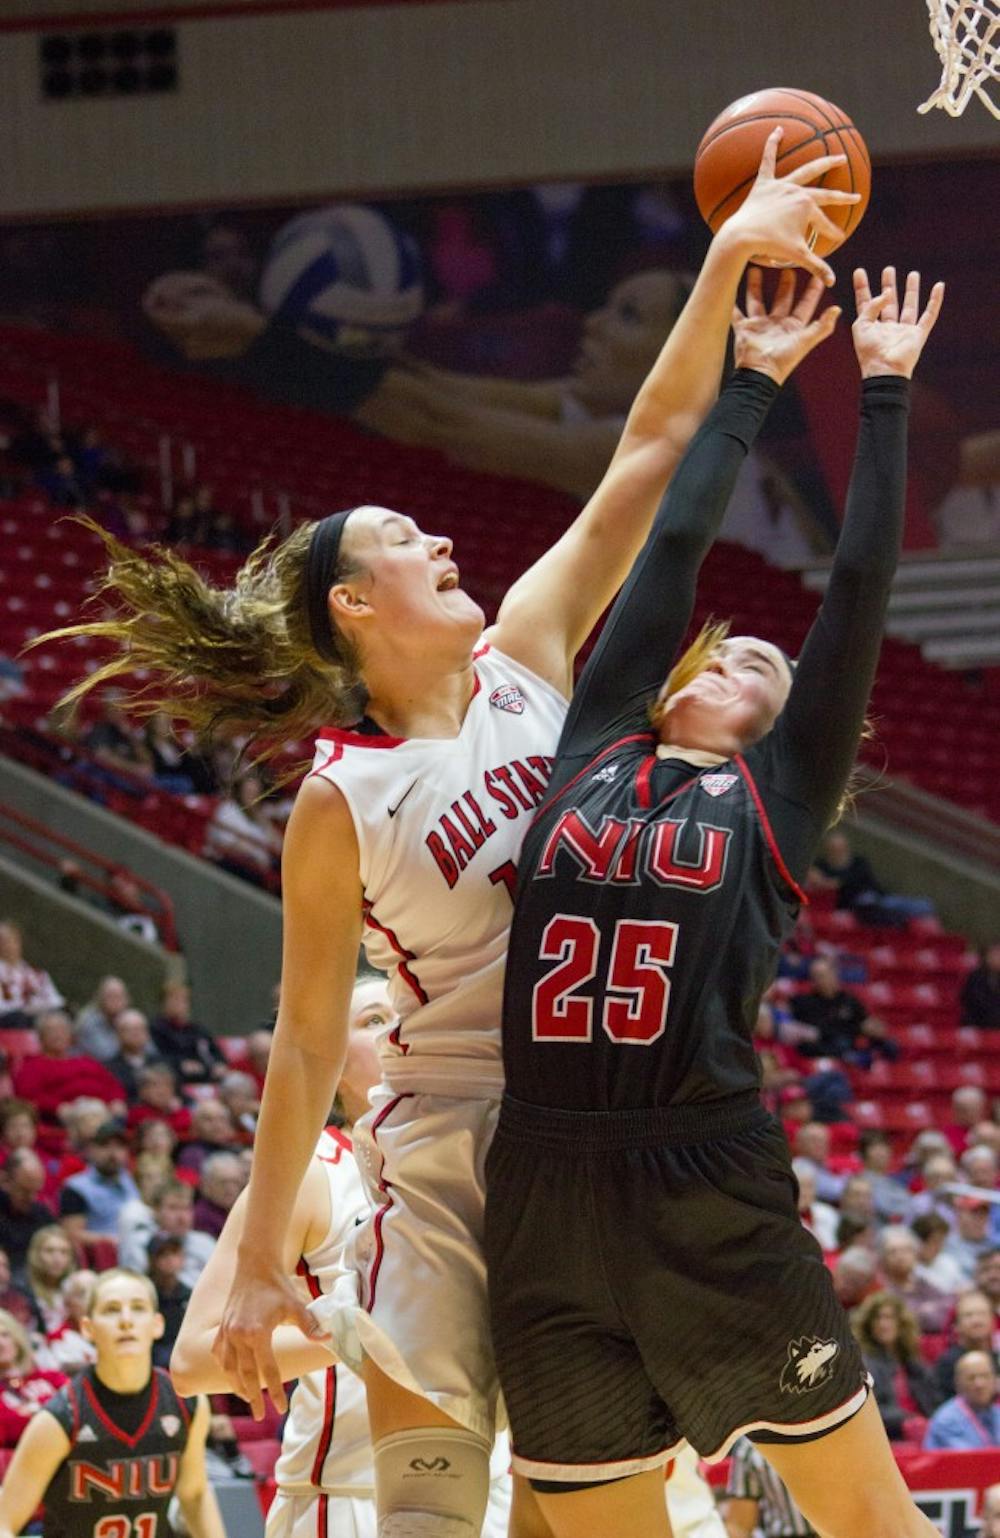 PREVIEW: Ball State women's basketball vs. Central Michigan